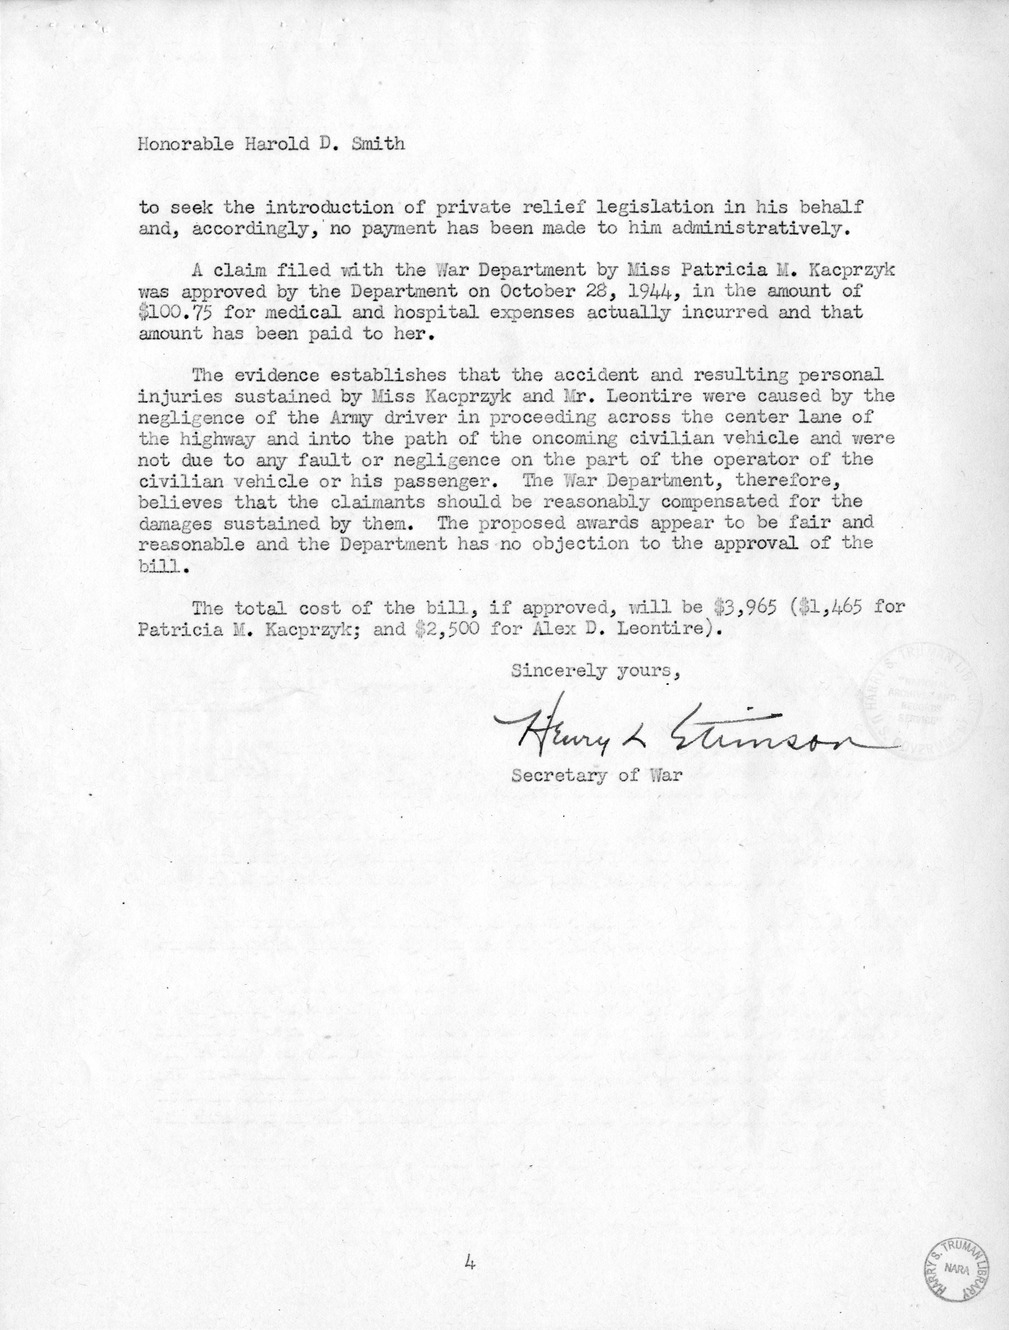 Memorandum from Frederick J. Bailey to M. C. Latta, H.R. 2511, For the Relief of Patricia M. Kacprzyk and Alex D. Leontire, with Attachments